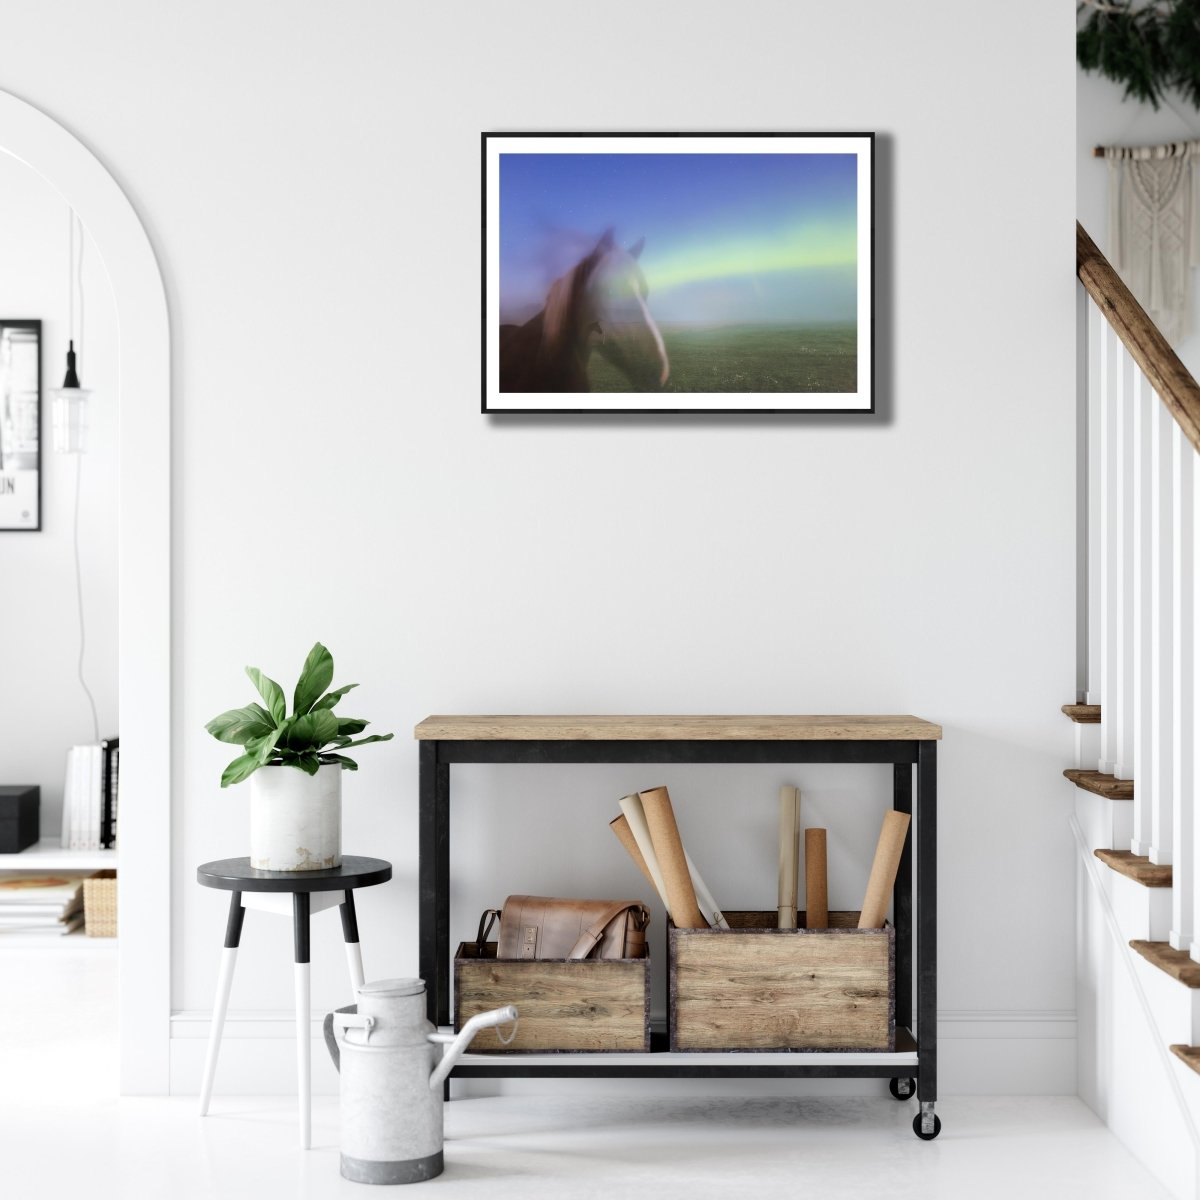 Fine art photography print of Horses with auroral antlers in a long exposure photo, black-framed, on white living room wall above desk.